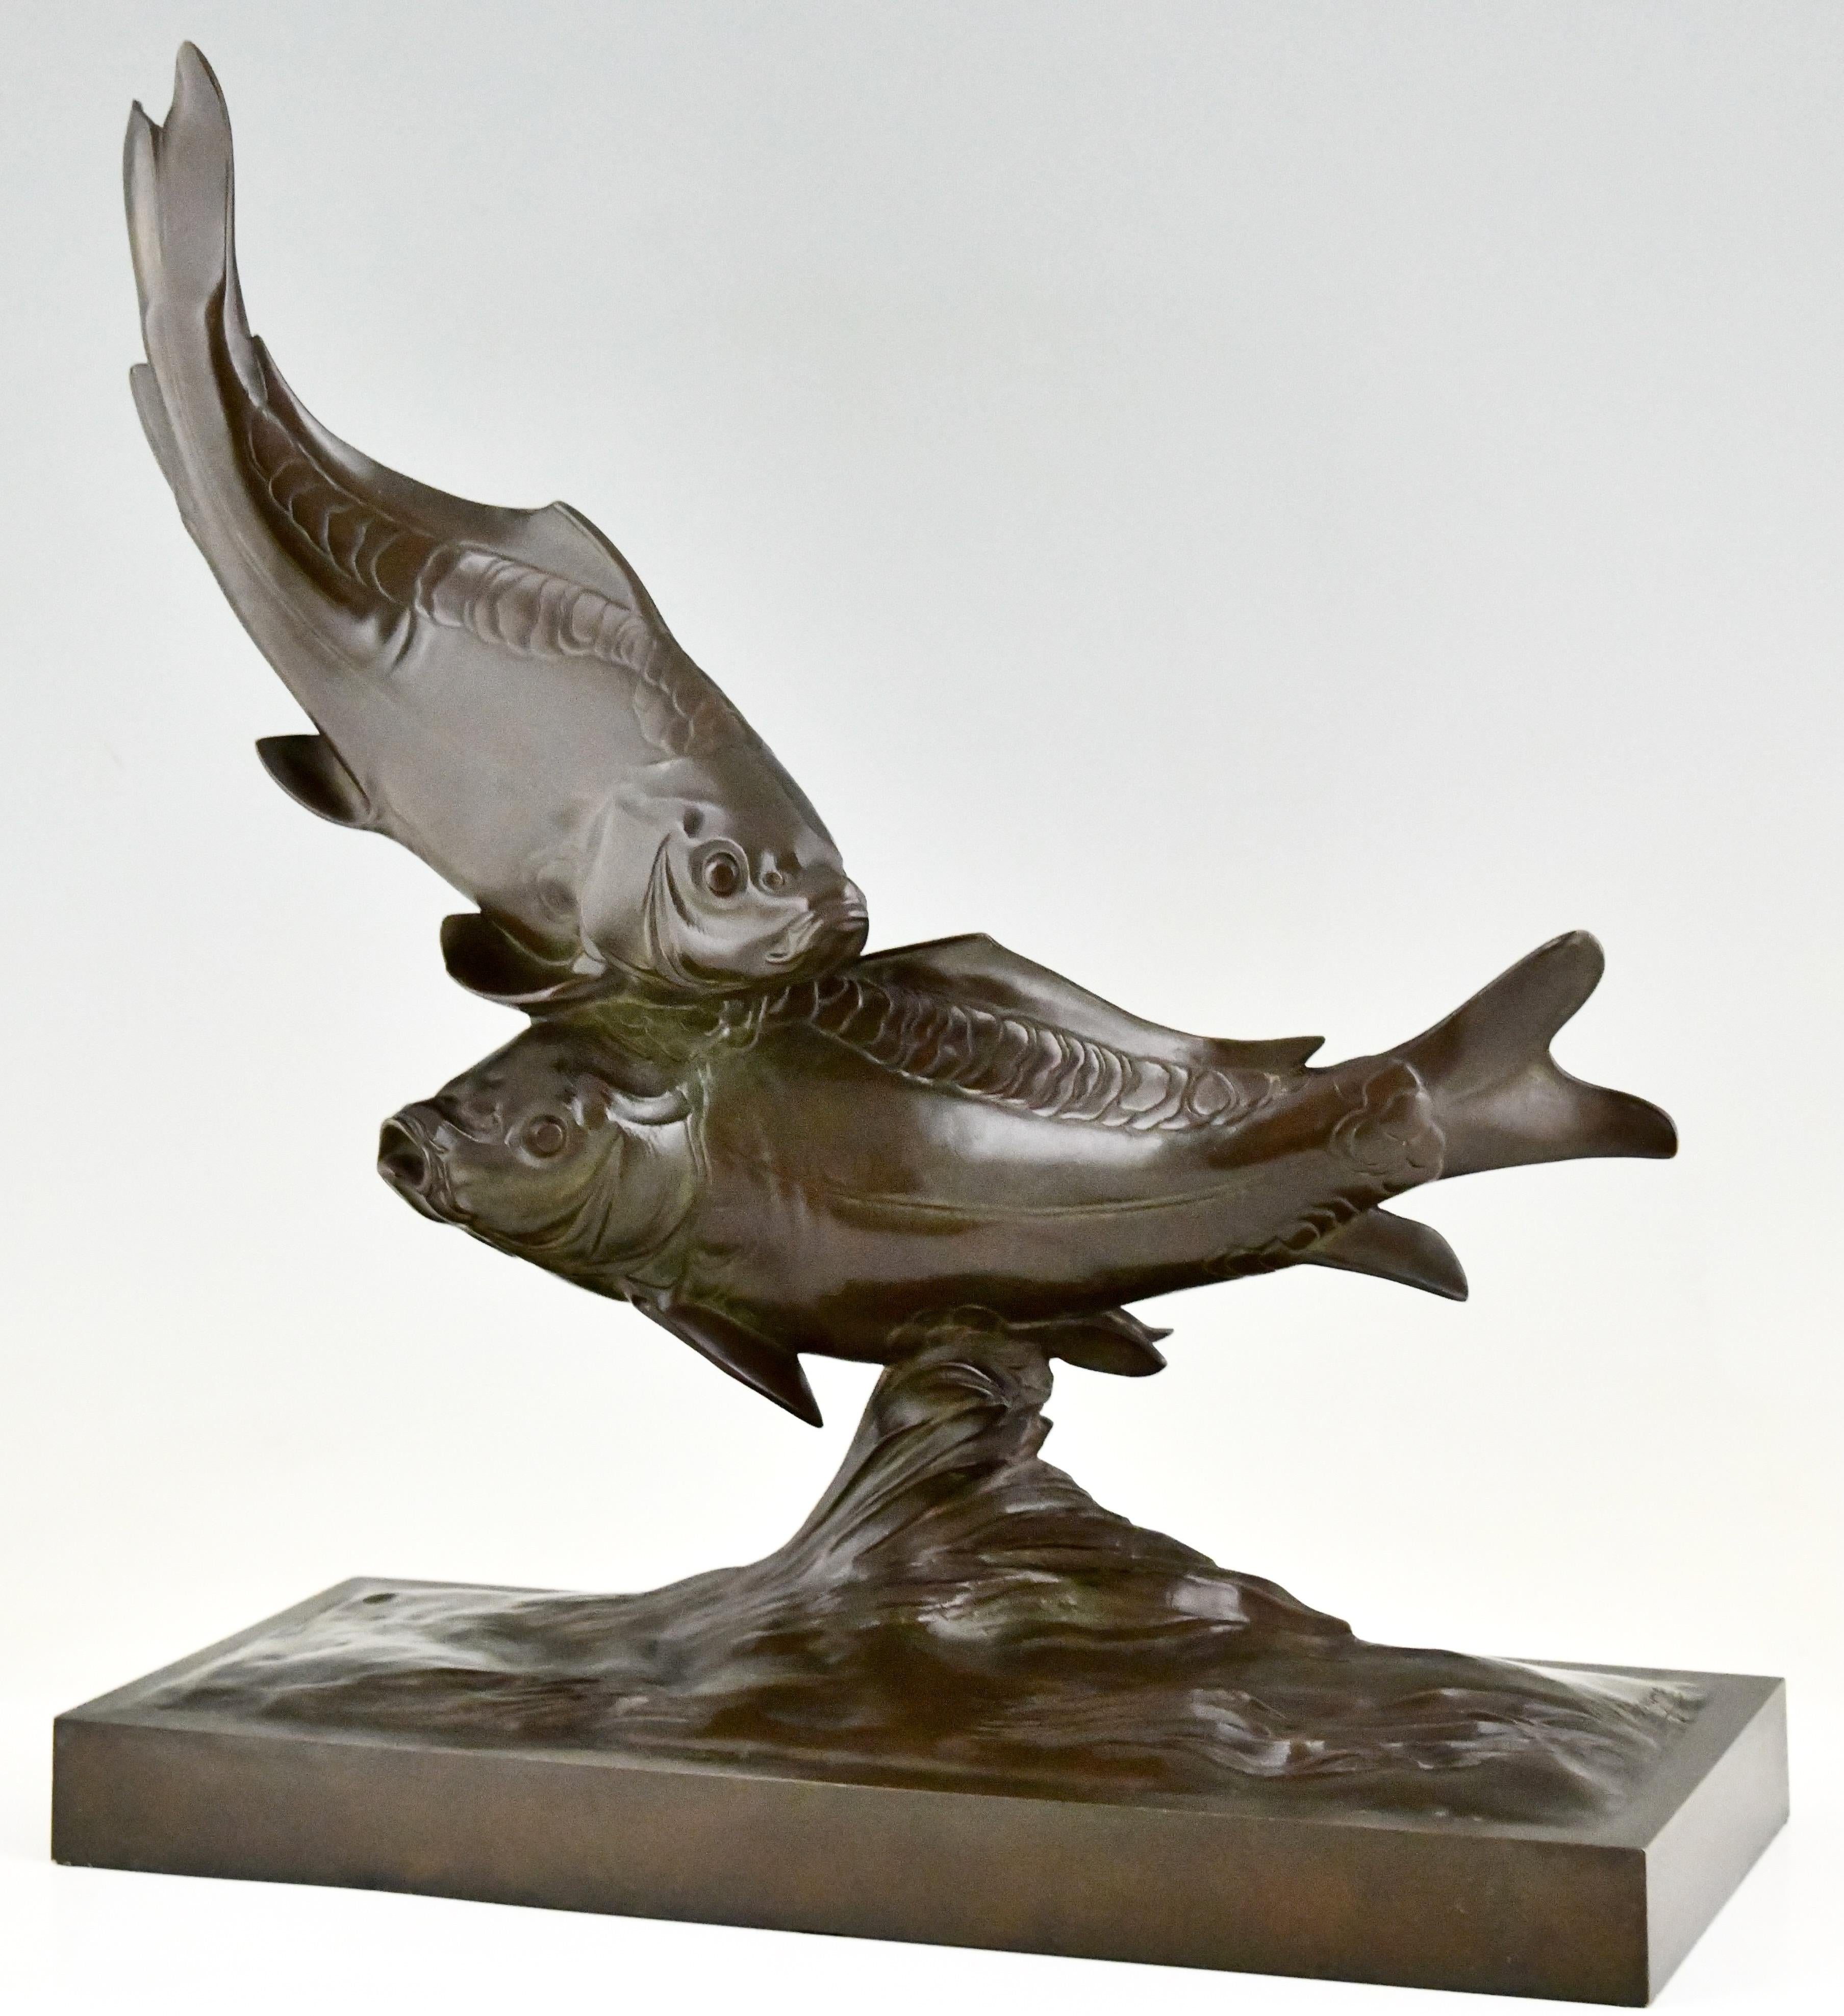 Art Deco bronze sculpture of two carp fish by Santiago Bonome, 1930. 
The sculptor was born in Spain and worked in France. 
Signed Bonome with Barbedienne Fondeur Paris. 
Bronze with brown patina. 
With certificate of authenticity.